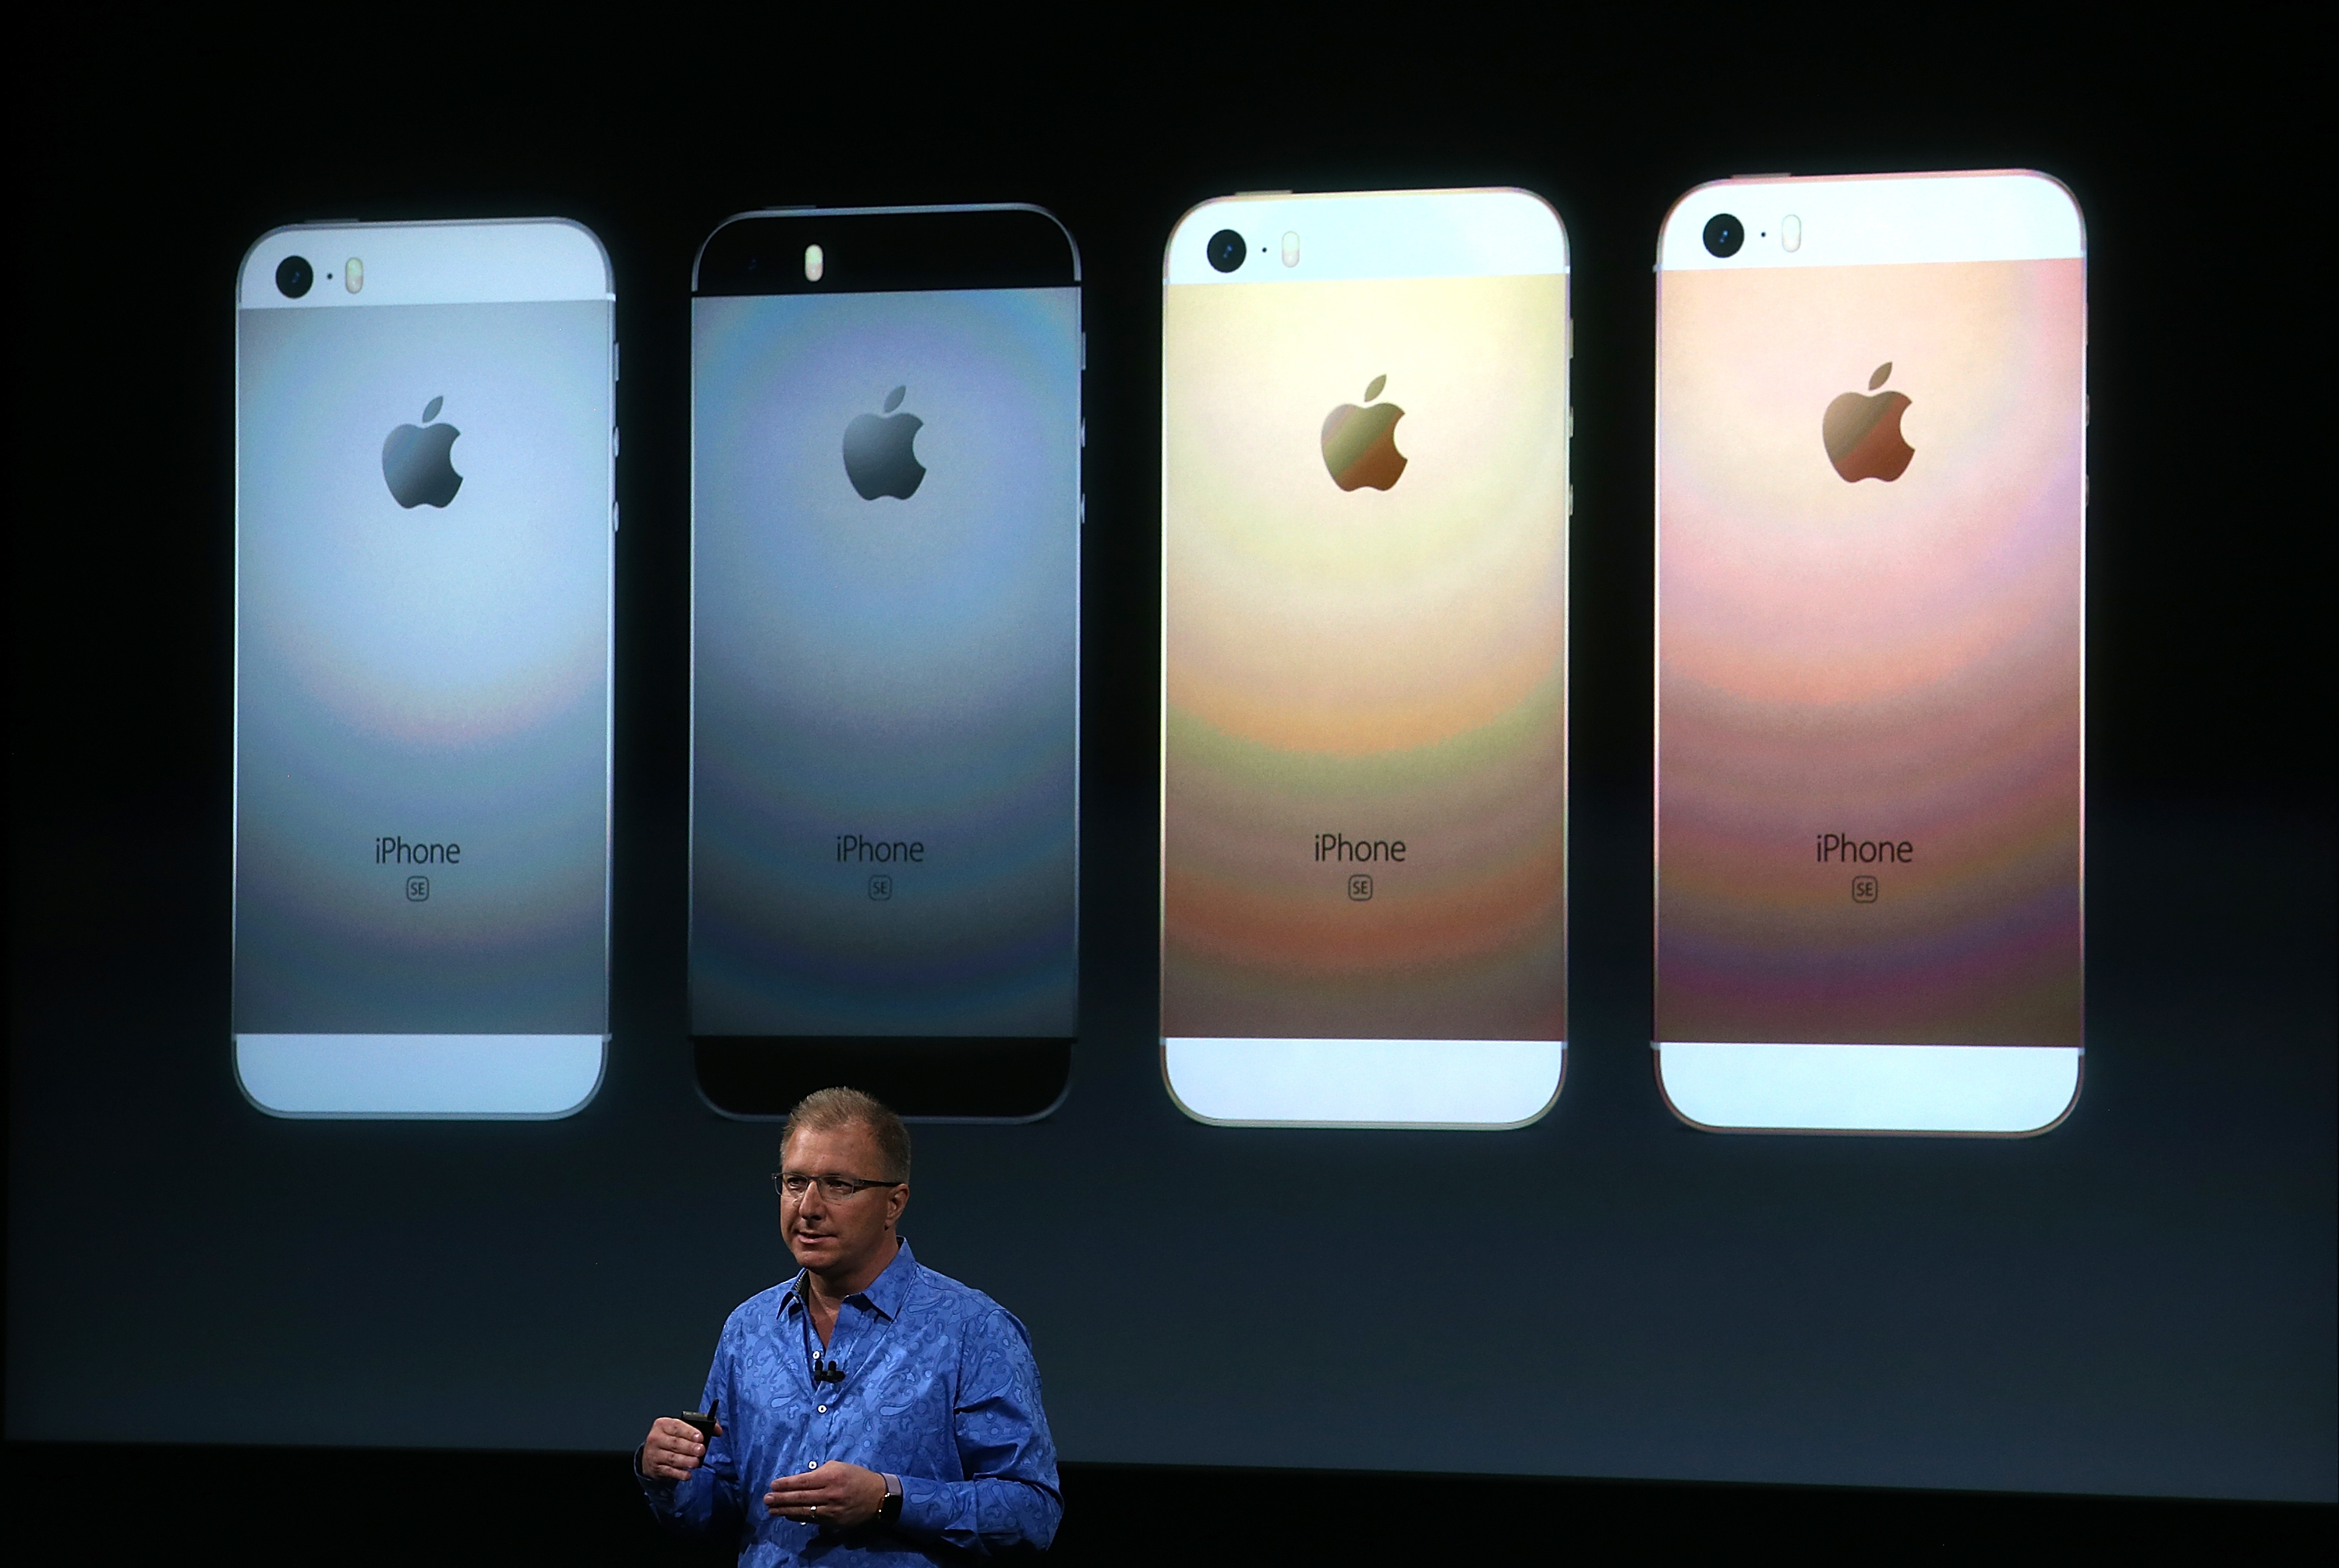 CUPERTINO, CA - MARCH 21:  Apple VP Greg Joswiak announces the new iPhone SE during an Apple special event at the Apple headquarters on March 21, 2016 in Cupertino, California. The company is expected to update its iPhone and iPad lines, and introduce new bands for the Apple Watch.  (Photo by Justin Sullivan/Getty Images)